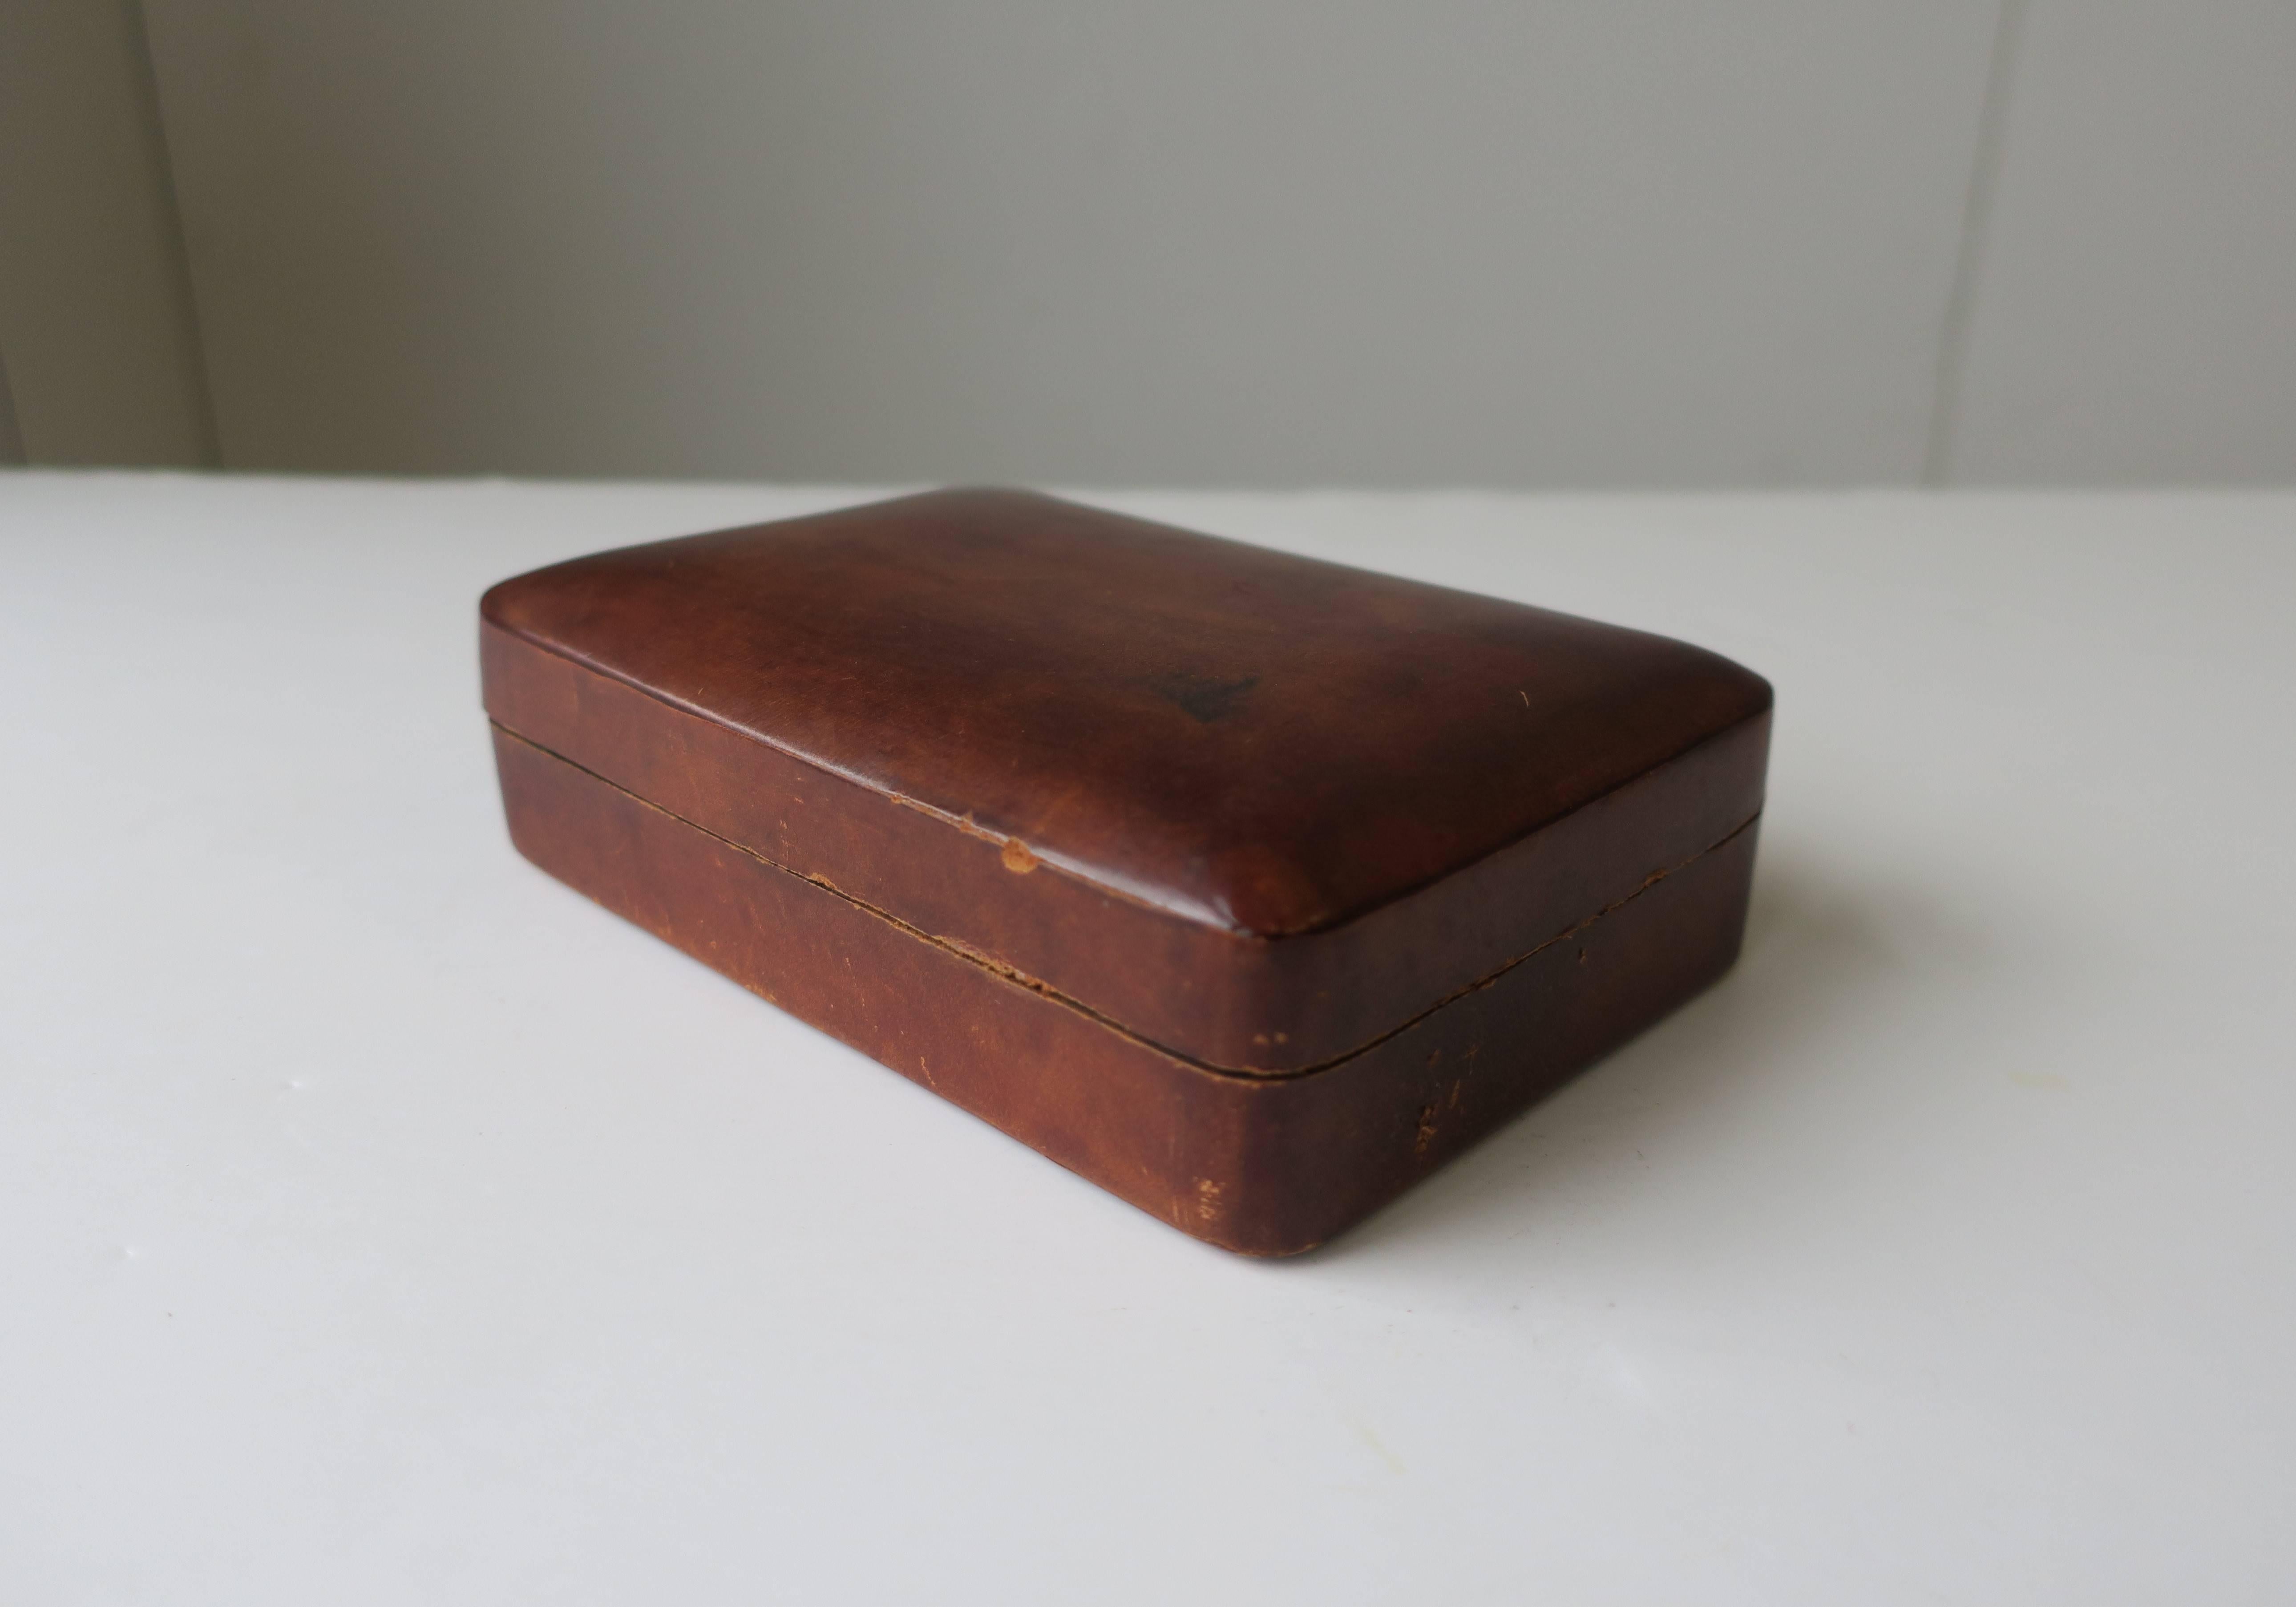 A beautiful vintage Italian all leather jewelry or vanity box with gold foil embossing on inside reading: Leonardo da Vinci. Made in Italy. 

Item available here online. By request, item can be made available by appointment to the trade in New